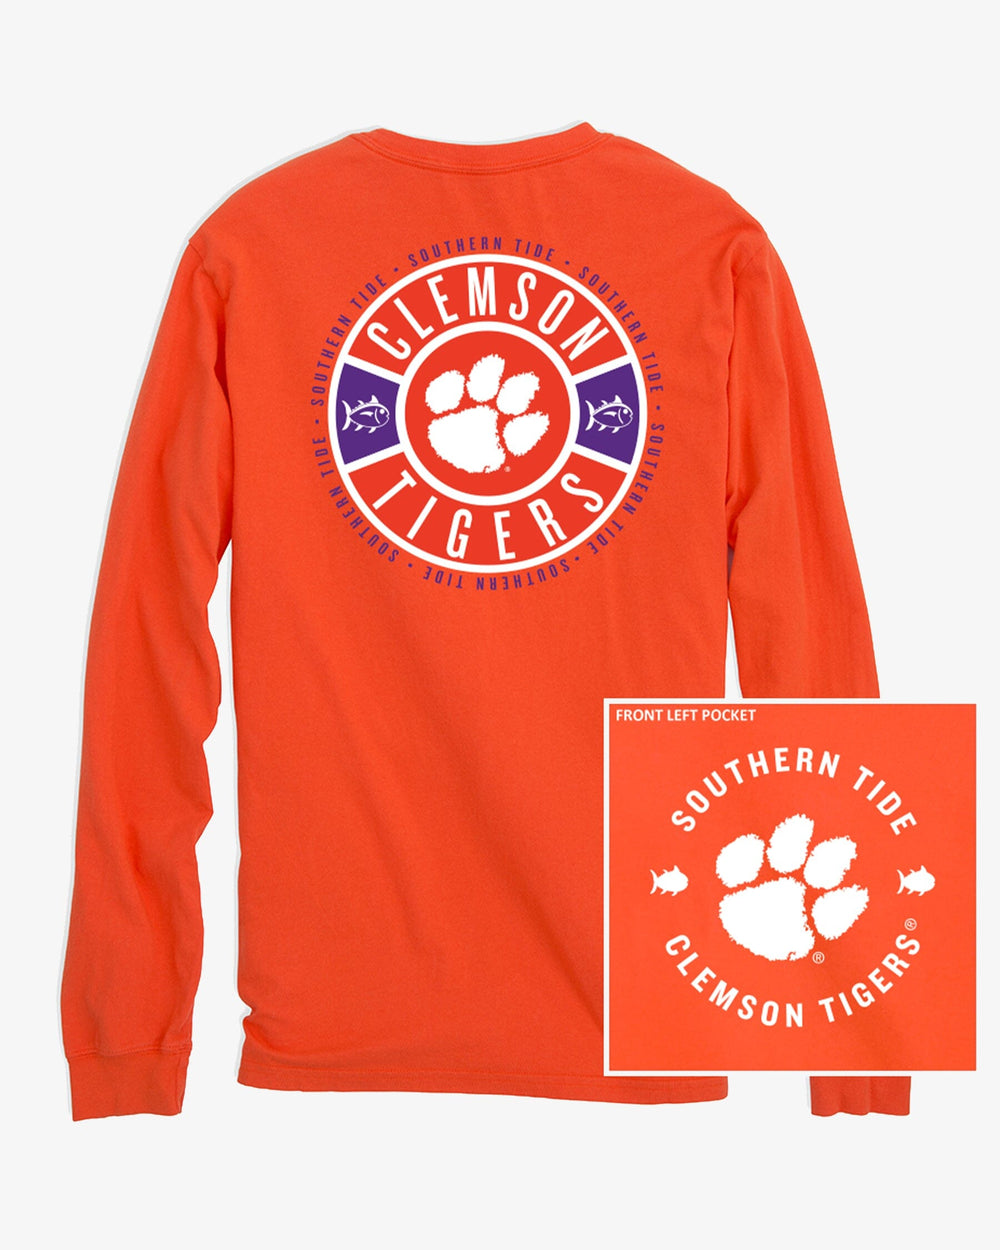 The front view of the Southern Tide Clemson Tigers Ring Badge T-Shirt by Southern Tide - Endzone Orange